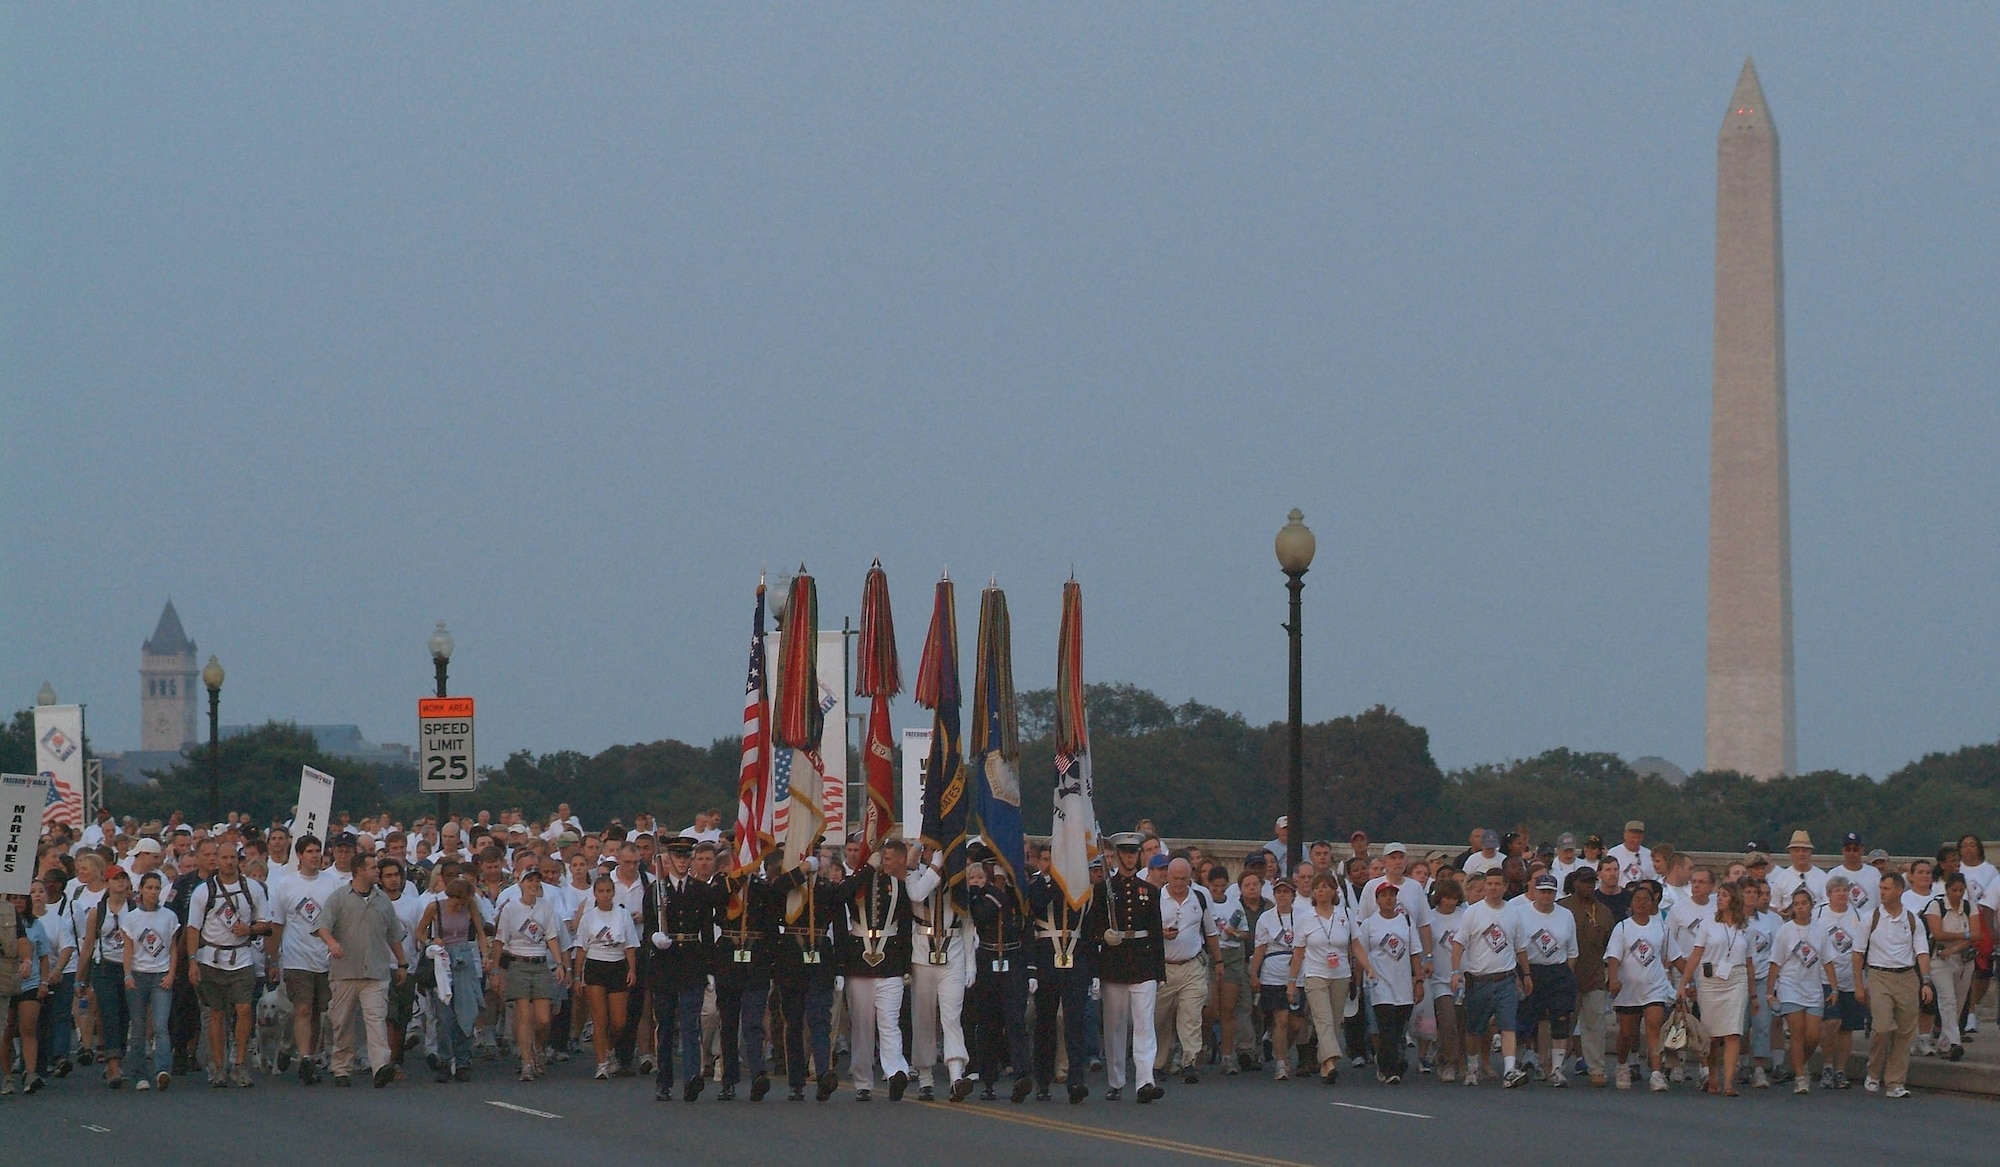 A joint-service honor guard leads thousands of people over the Memorial Bridge in Washington, D.C., Sept. 10, during the Pentagon's 2nd Annual America Supports You Freedom Walk. The walk commemorates the 5th anniversary of the Sept. 11, 2001, terrorist attacks. (U.S. Navy photo/Chief Mass Communication Specialist Mate Johnny Bivera)